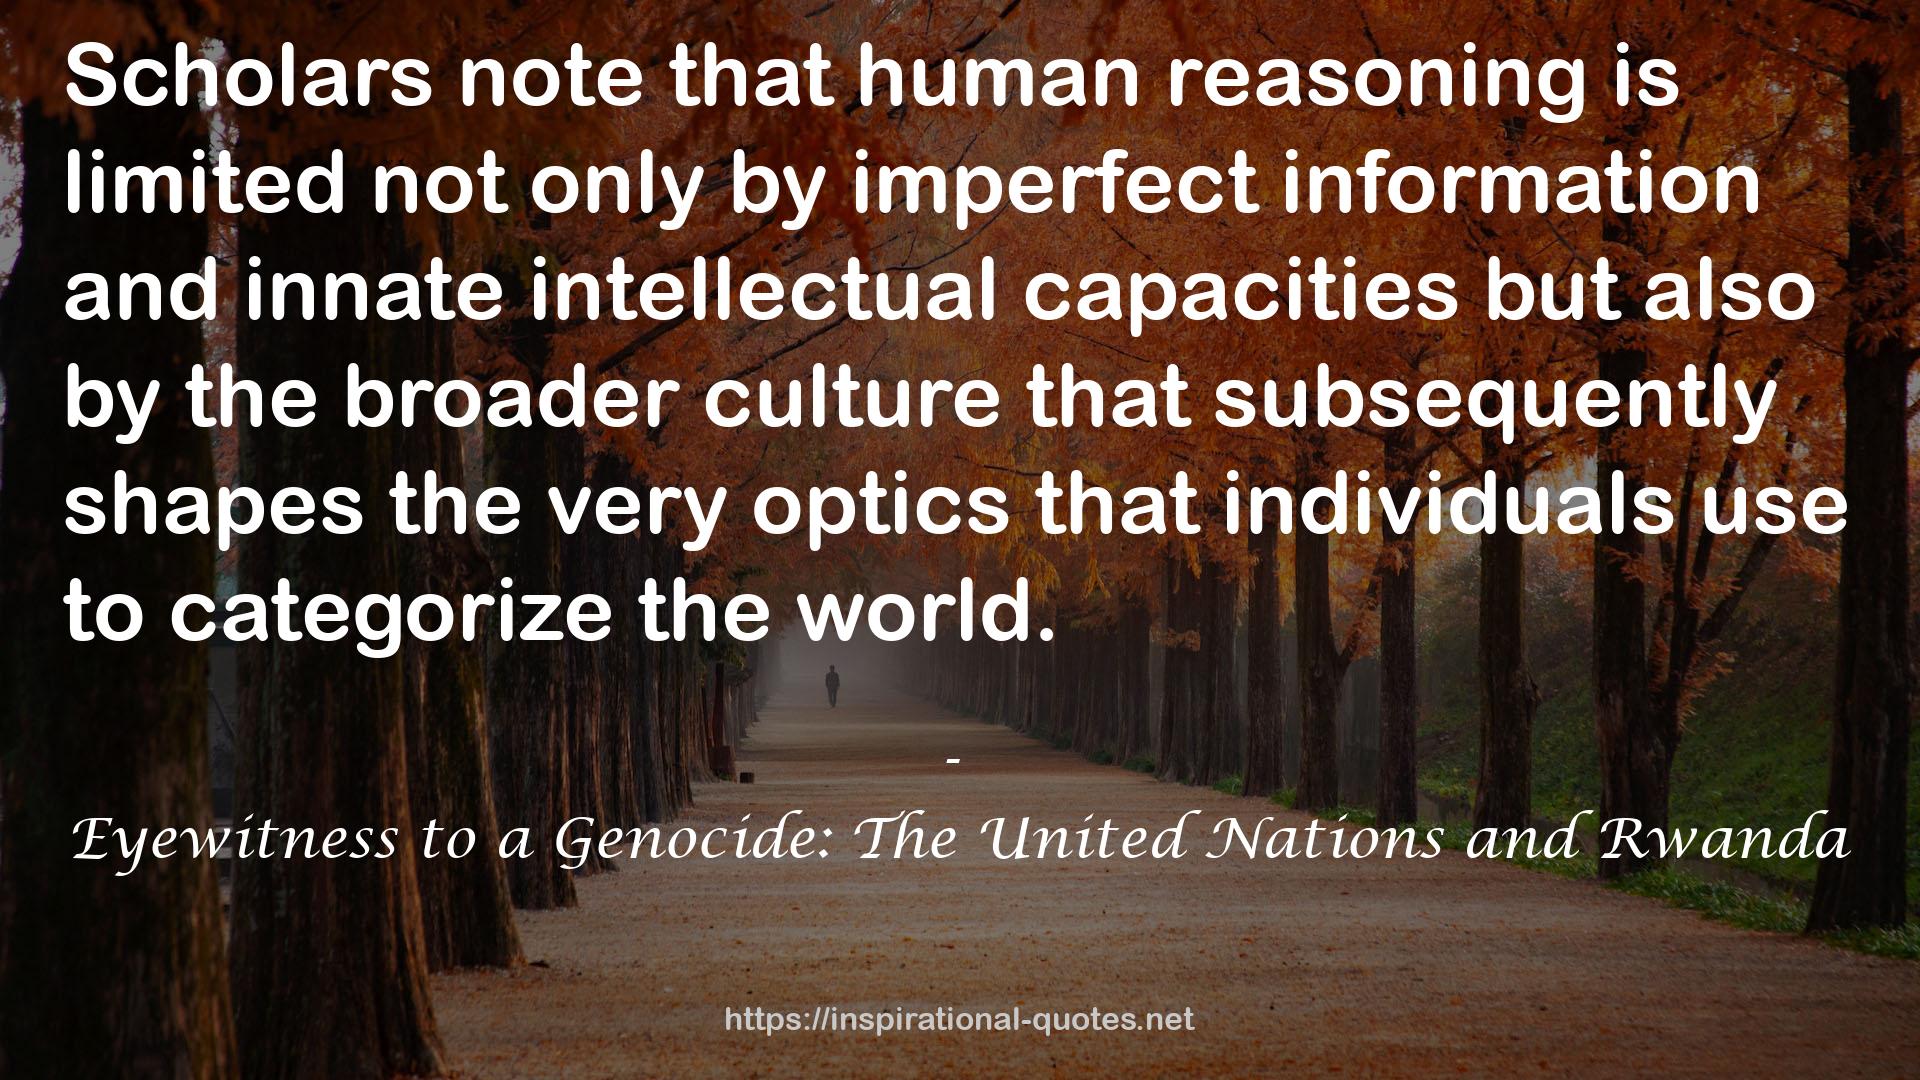 Eyewitness to a Genocide: The United Nations and Rwanda QUOTES